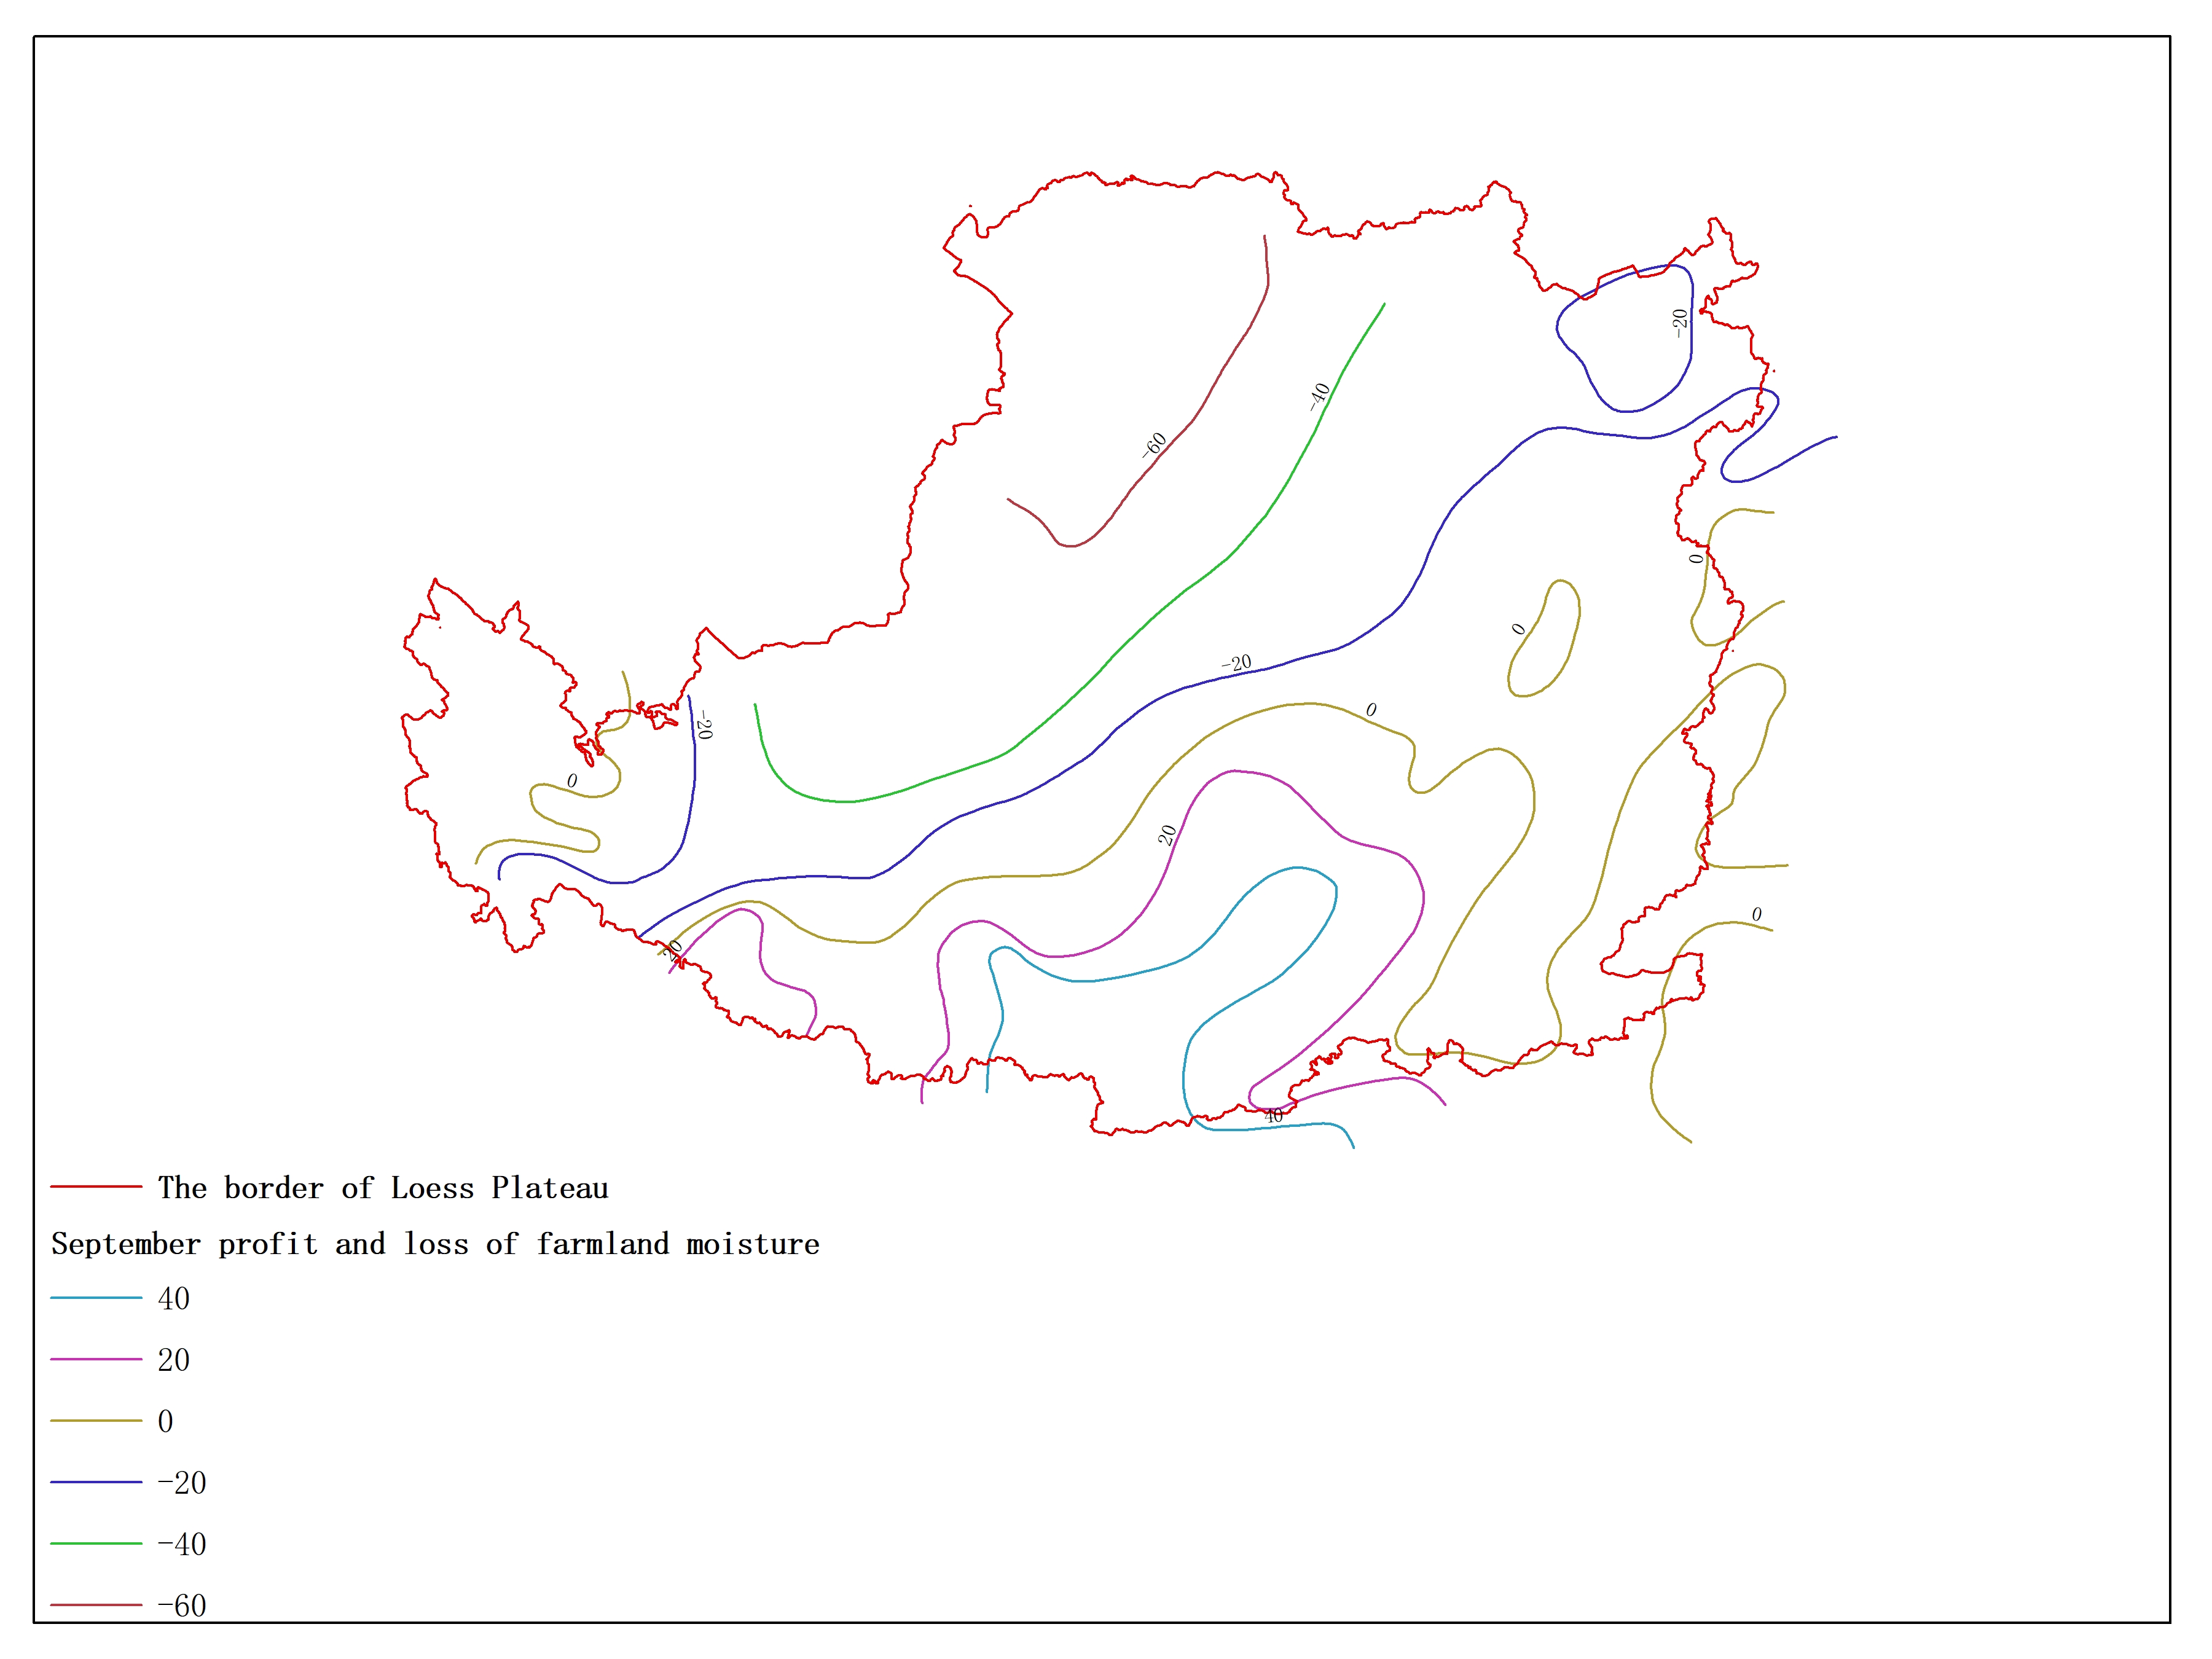 Agricultural climate resource atlas of Loess Plateau-September profit and loss of farmland moisture